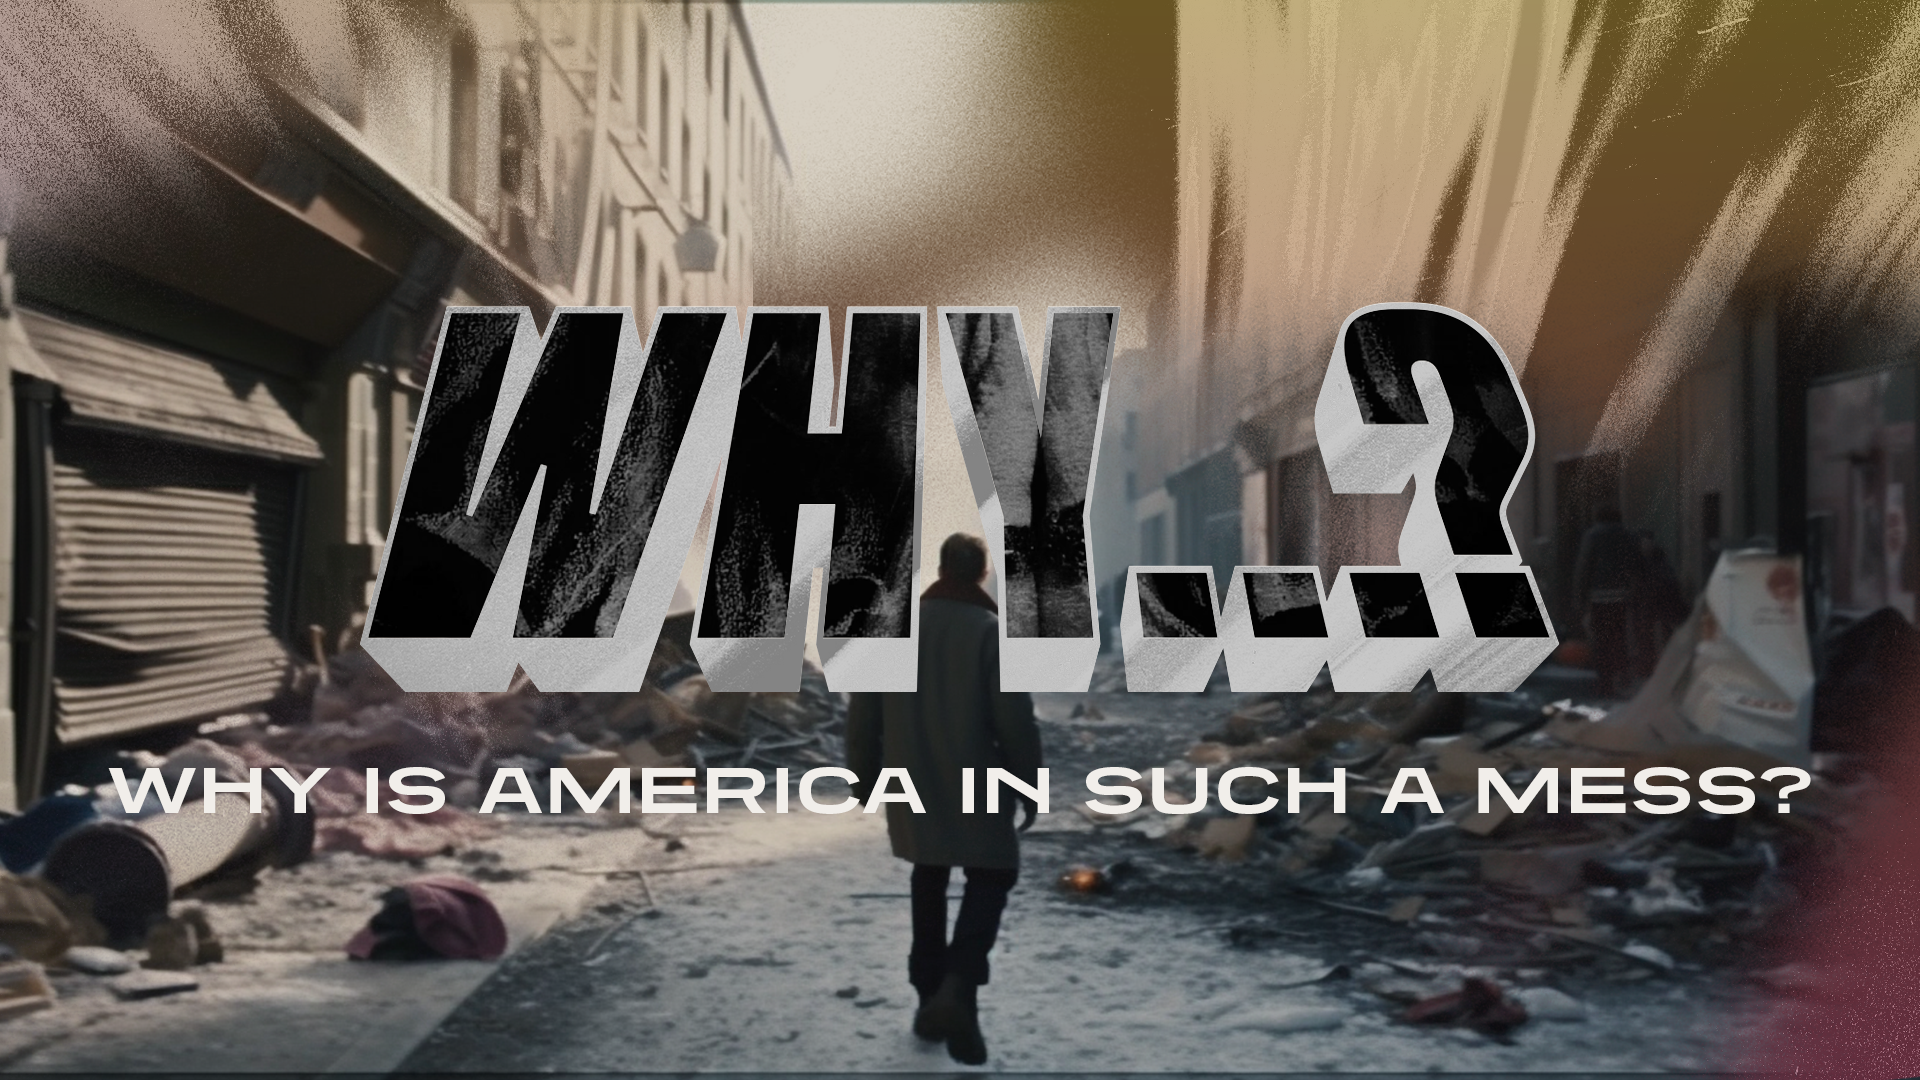 08:00 – WHY: Is America In Such A Mess?